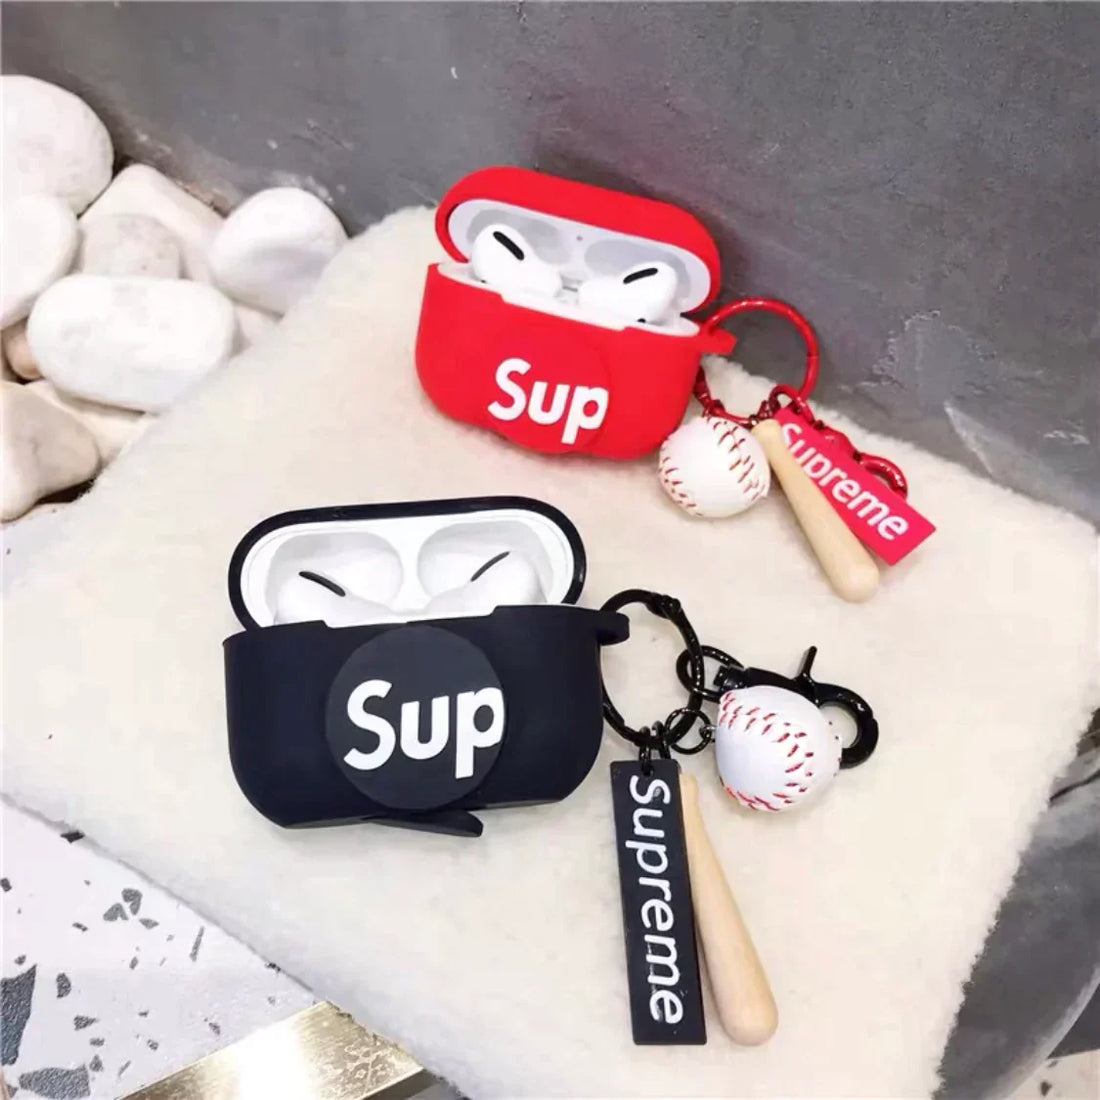 Sup AirPods Cases